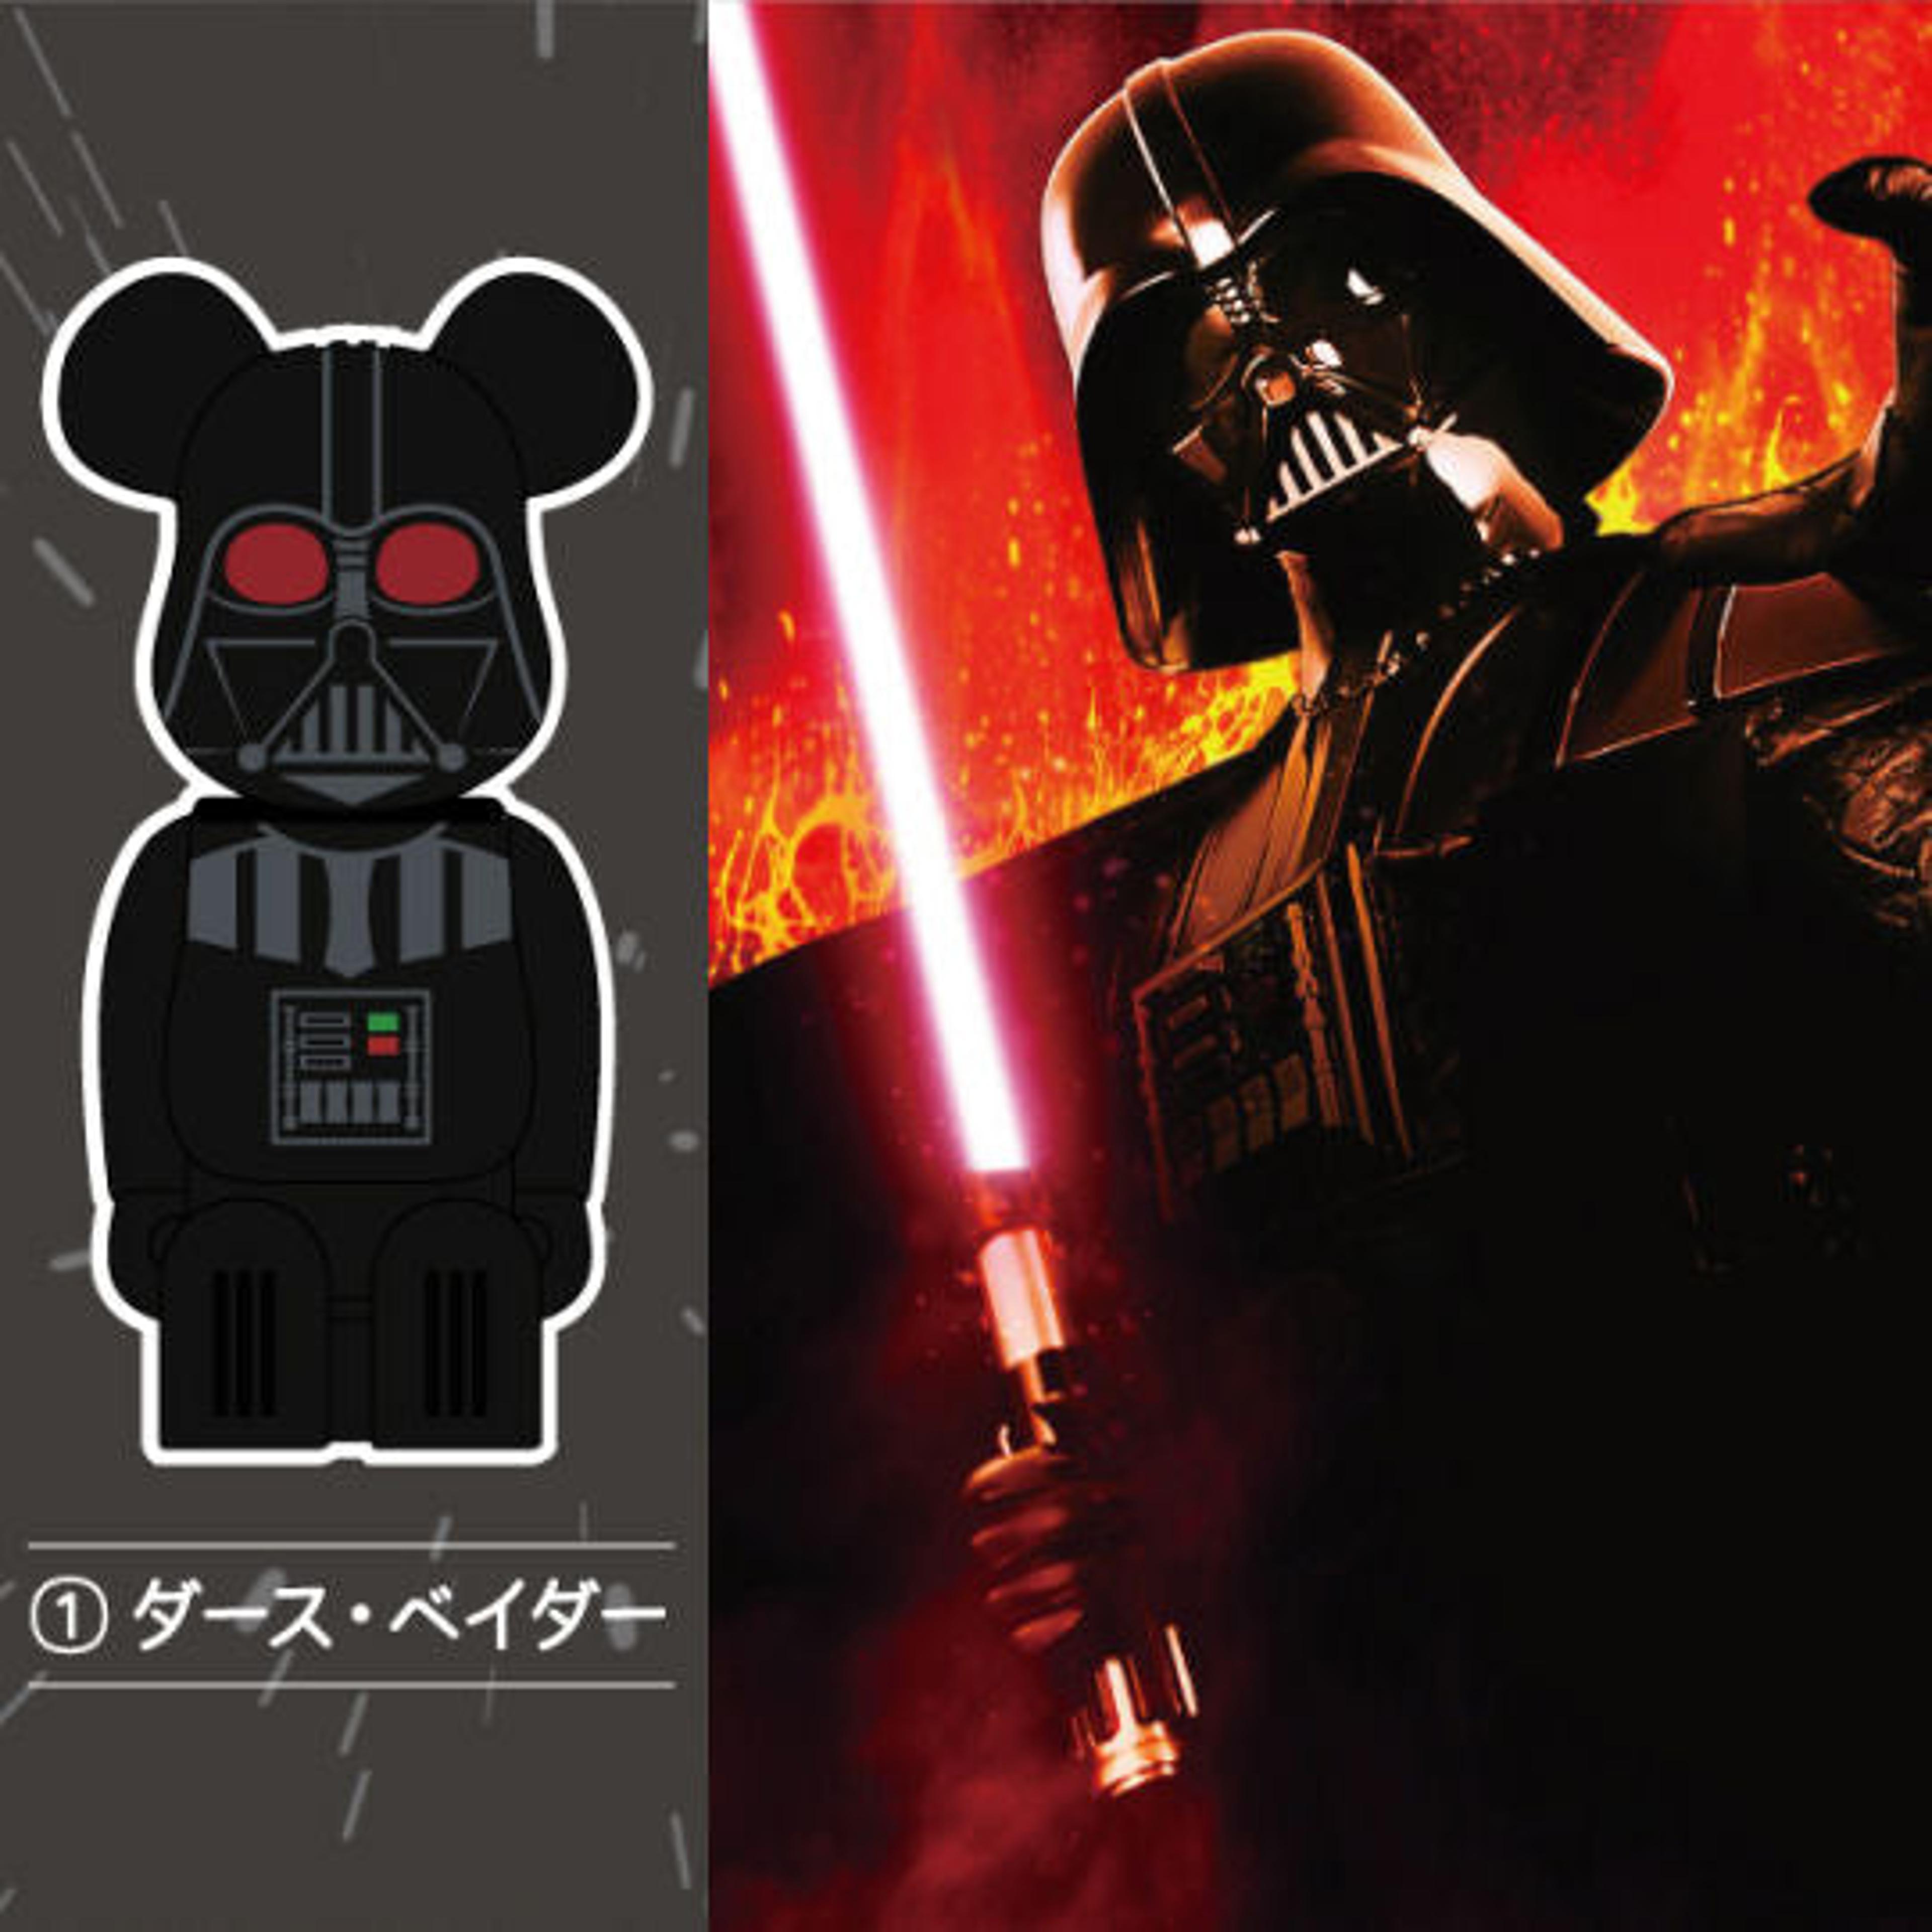 Alternate View 6 of Medicom Toy BE＠RBRICK Cleverin Star Wars 6 Piece Compete Set L